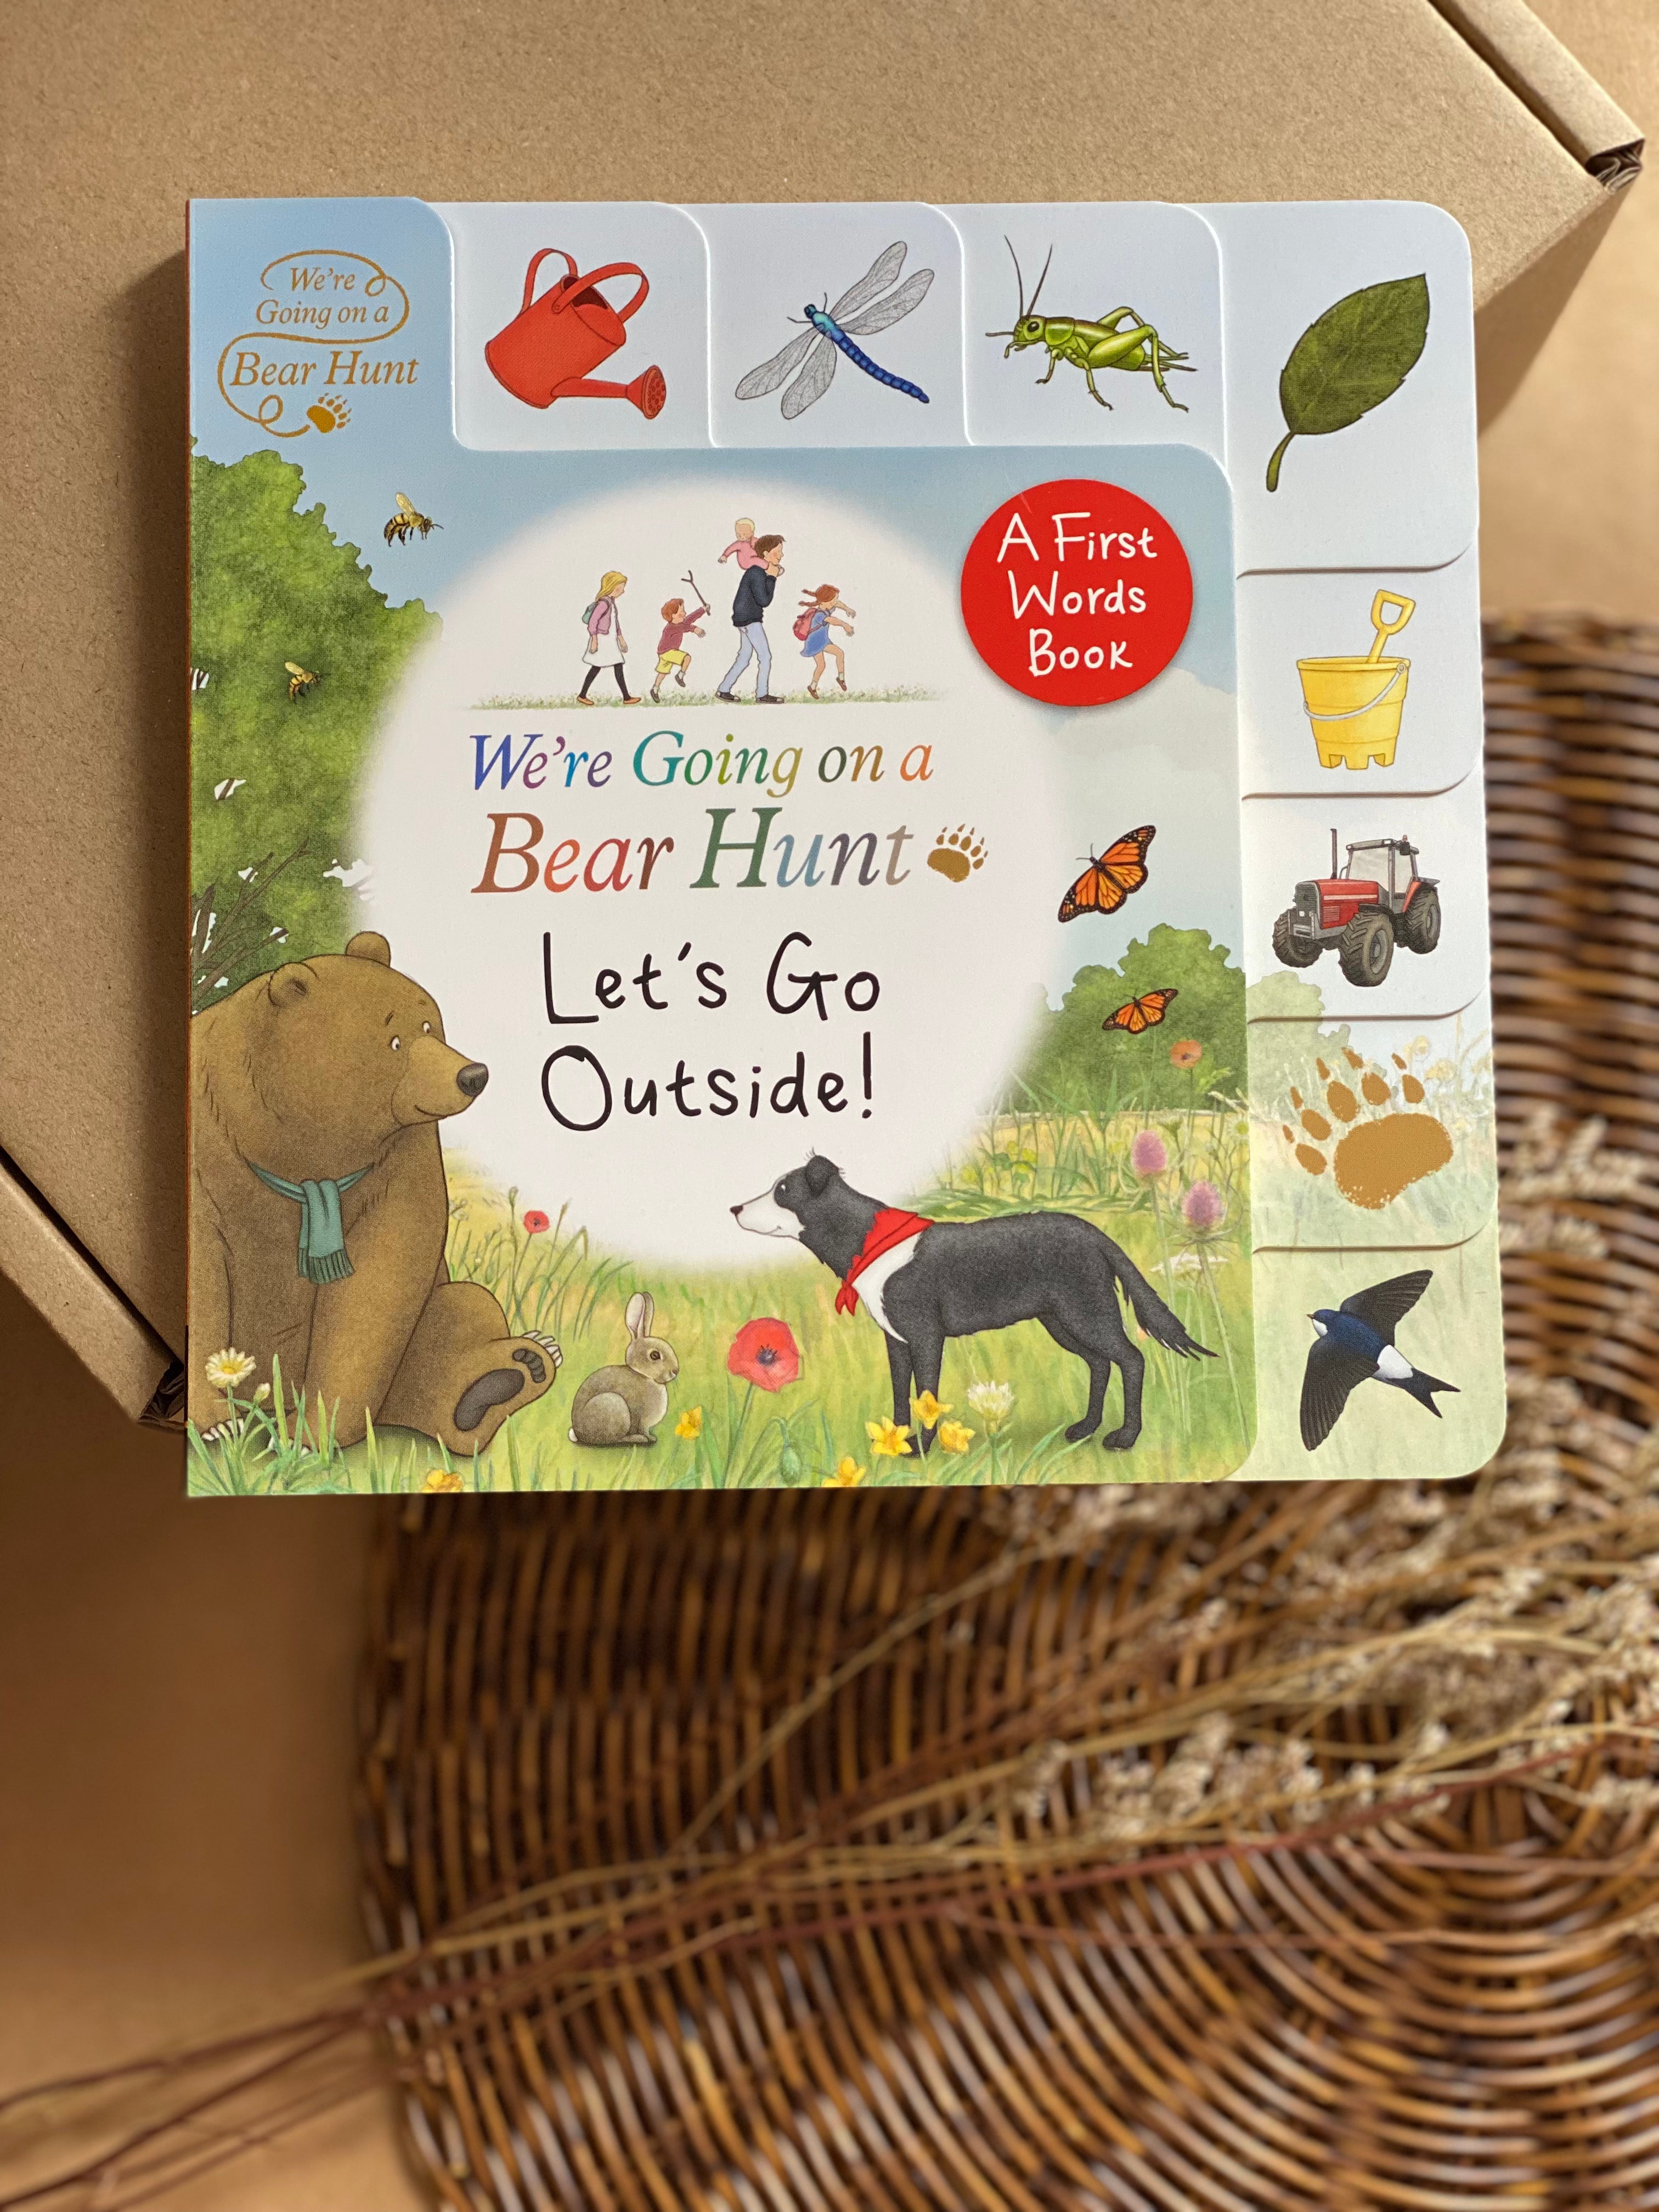 We're Going on a Bear Hunt Let's Go Outside! A First Words Book